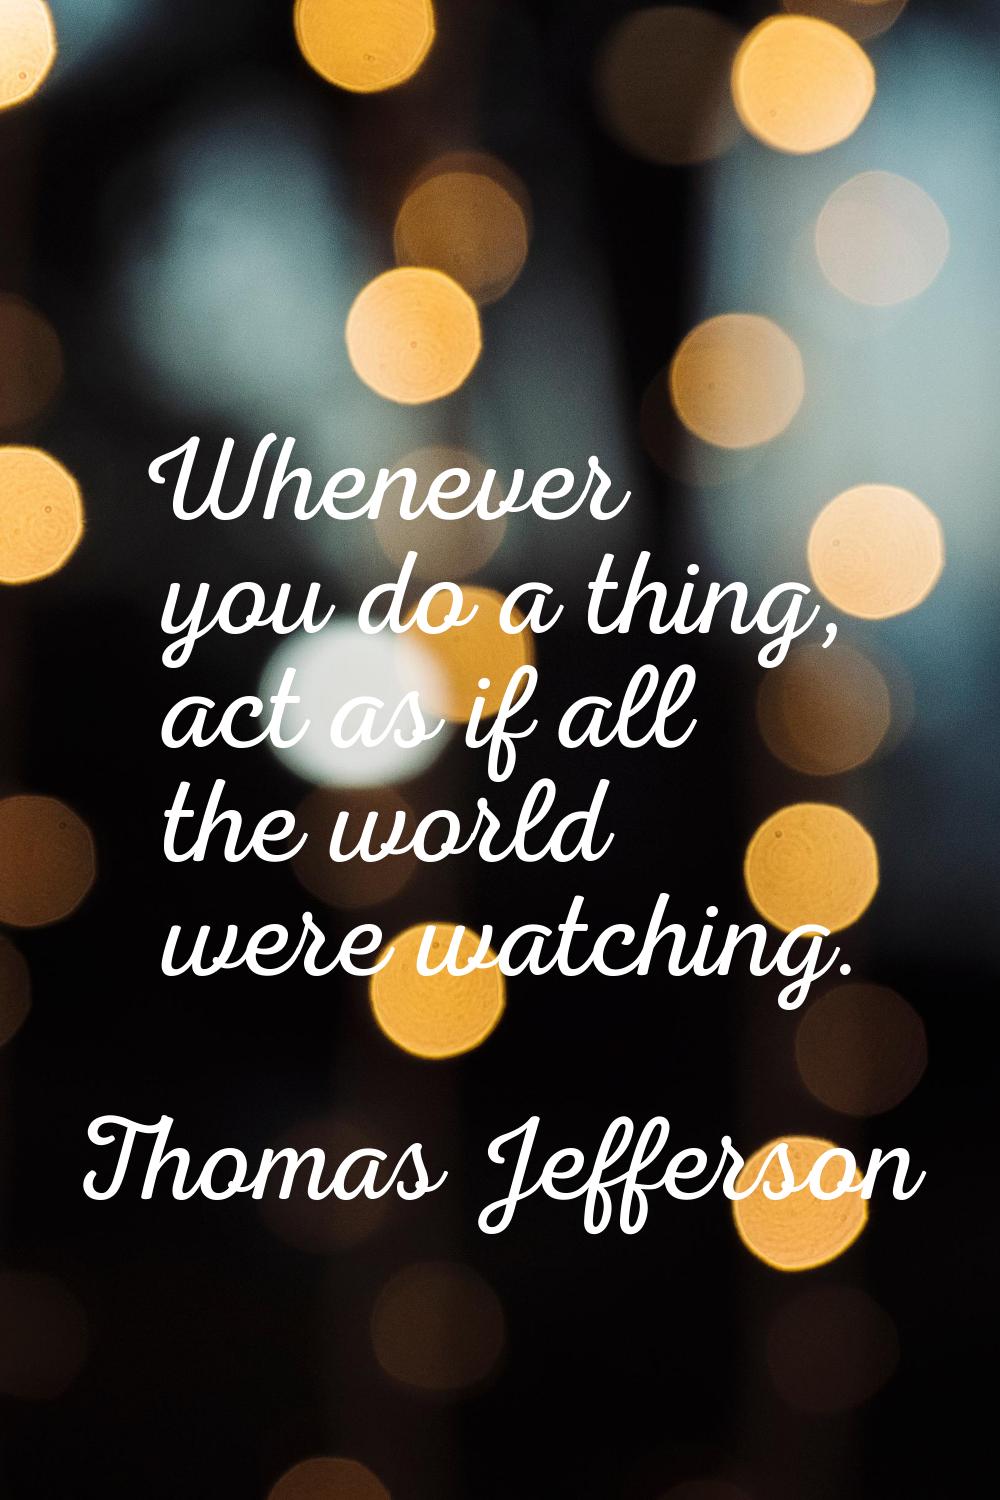 Whenever you do a thing, act as if all the world were watching.